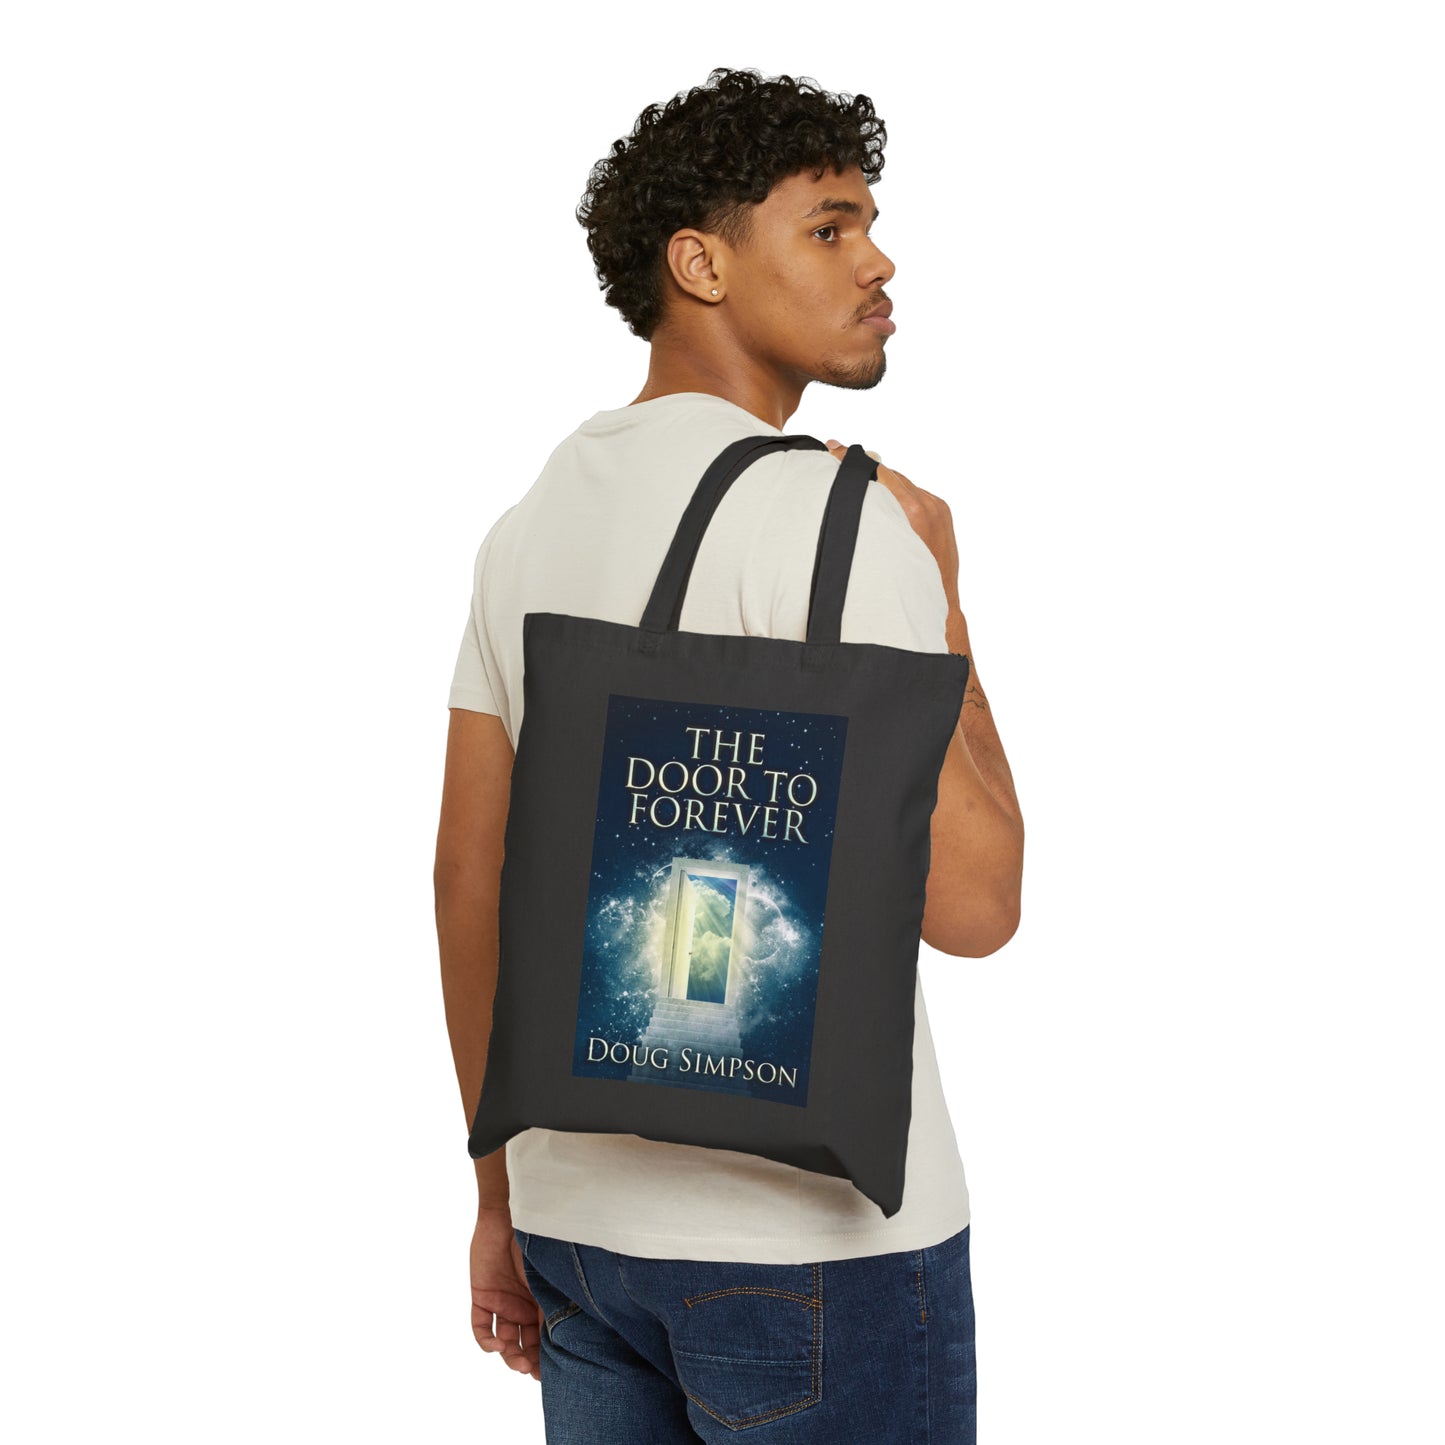 The Door To Forever - Cotton Canvas Tote Bag